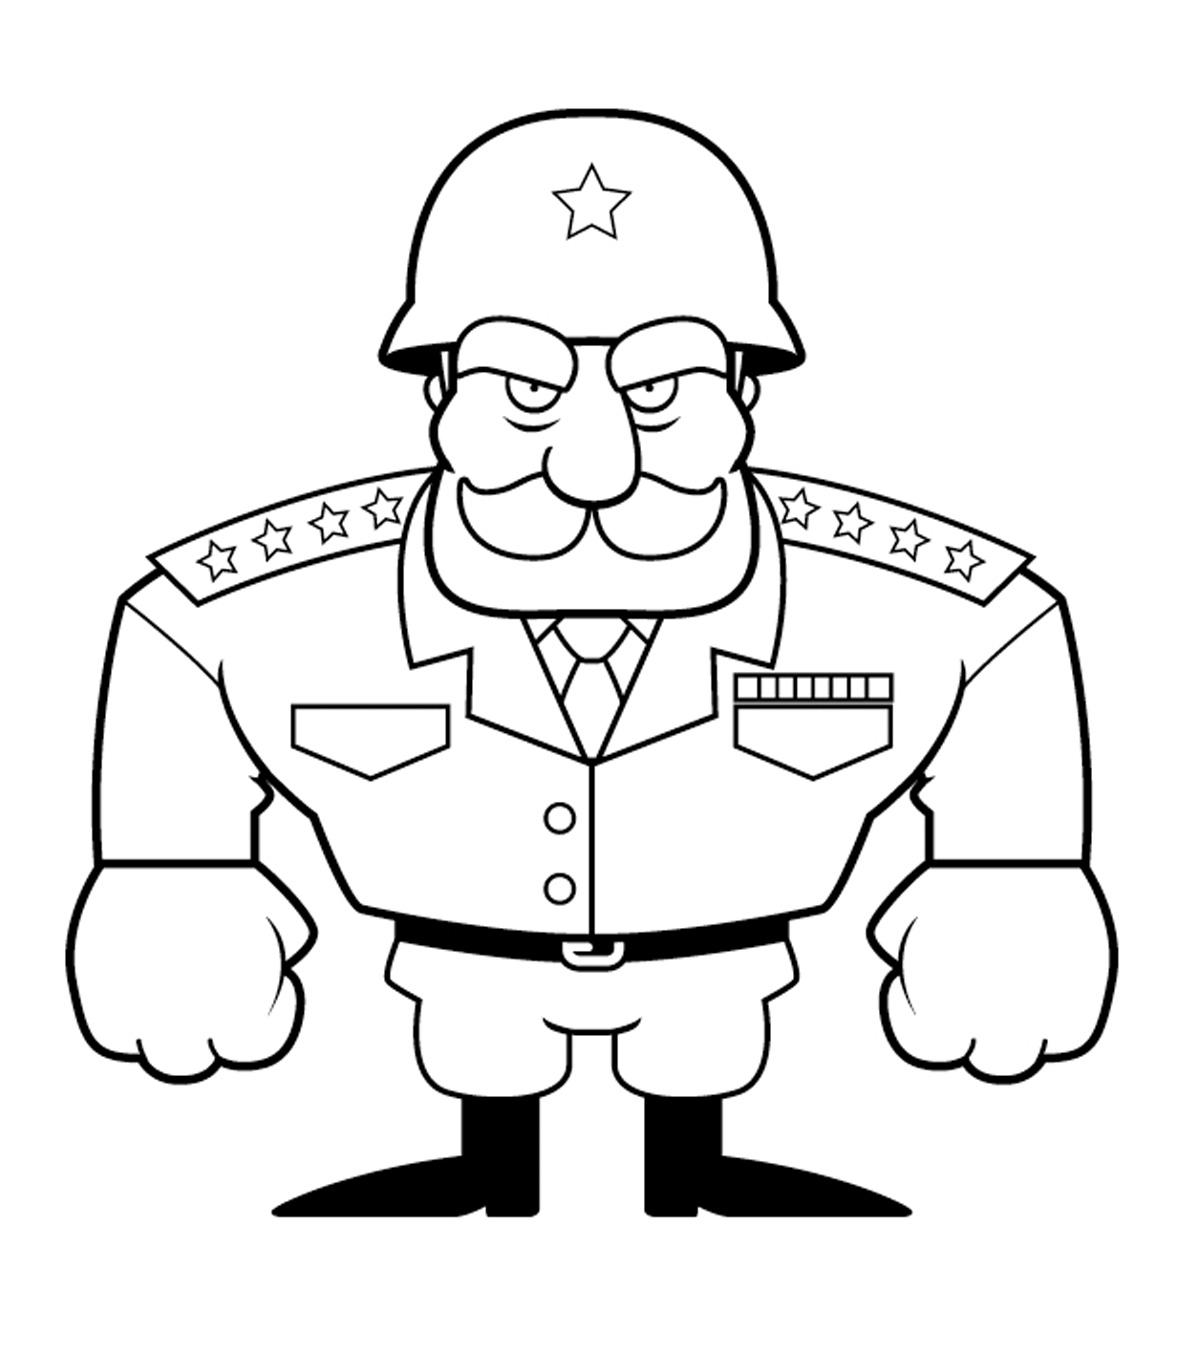 Military Coloring Pages - Free Printables - MomJunction